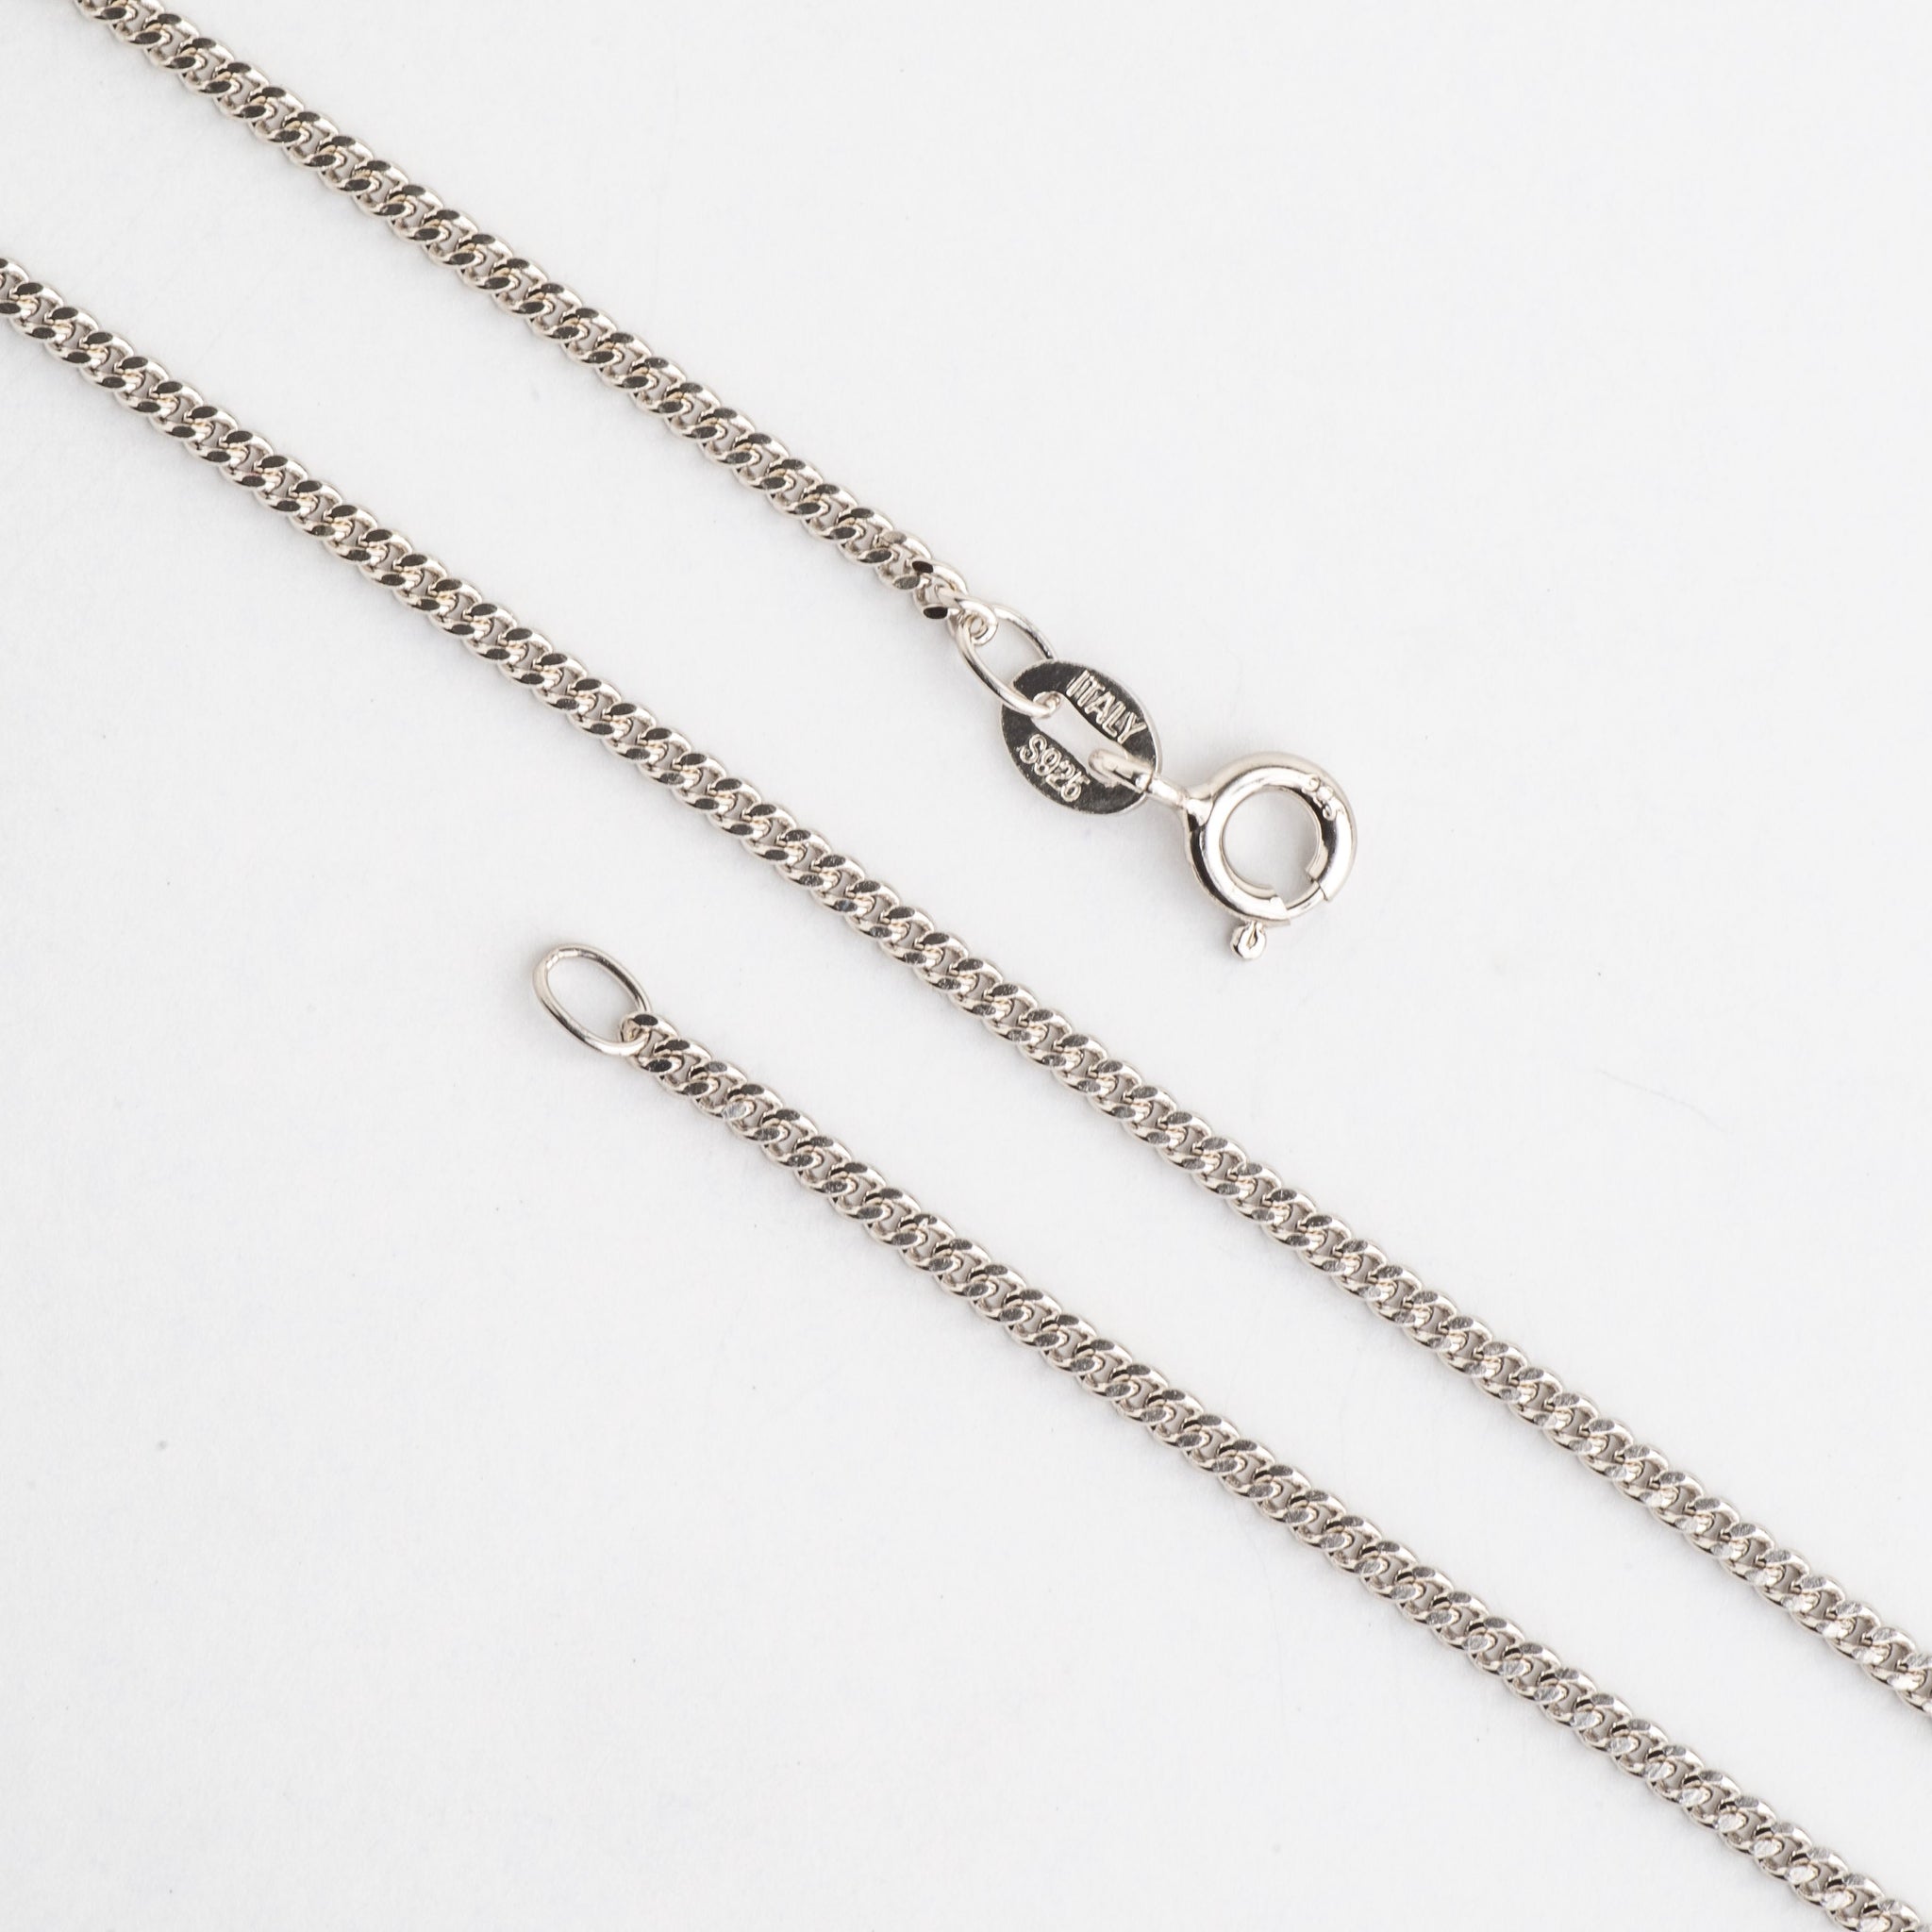 Necklace 16 inch N5ST 1.75mm Curb Chain Sterling Silver Necklace With Spring Ring Clasp Available in 2 Sizes Made in Italy .925 Sterling Silver 1.75mm Curb Chain .925 Sterling Silver Necklace With Spring Ring Clasp  N5ST16